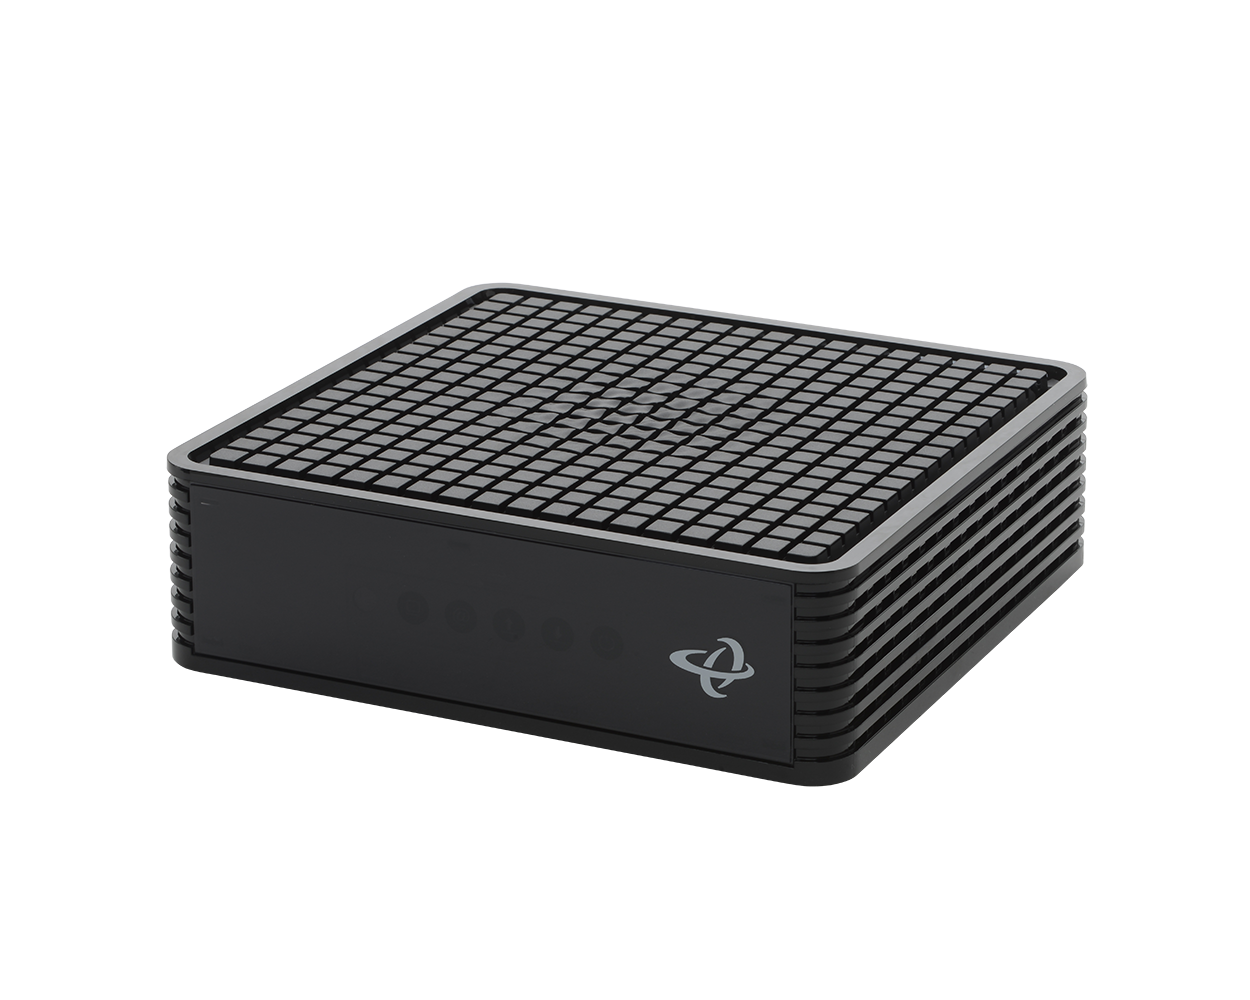 DOCSIS 3.1 Cable Modem from Hitron - CODA46